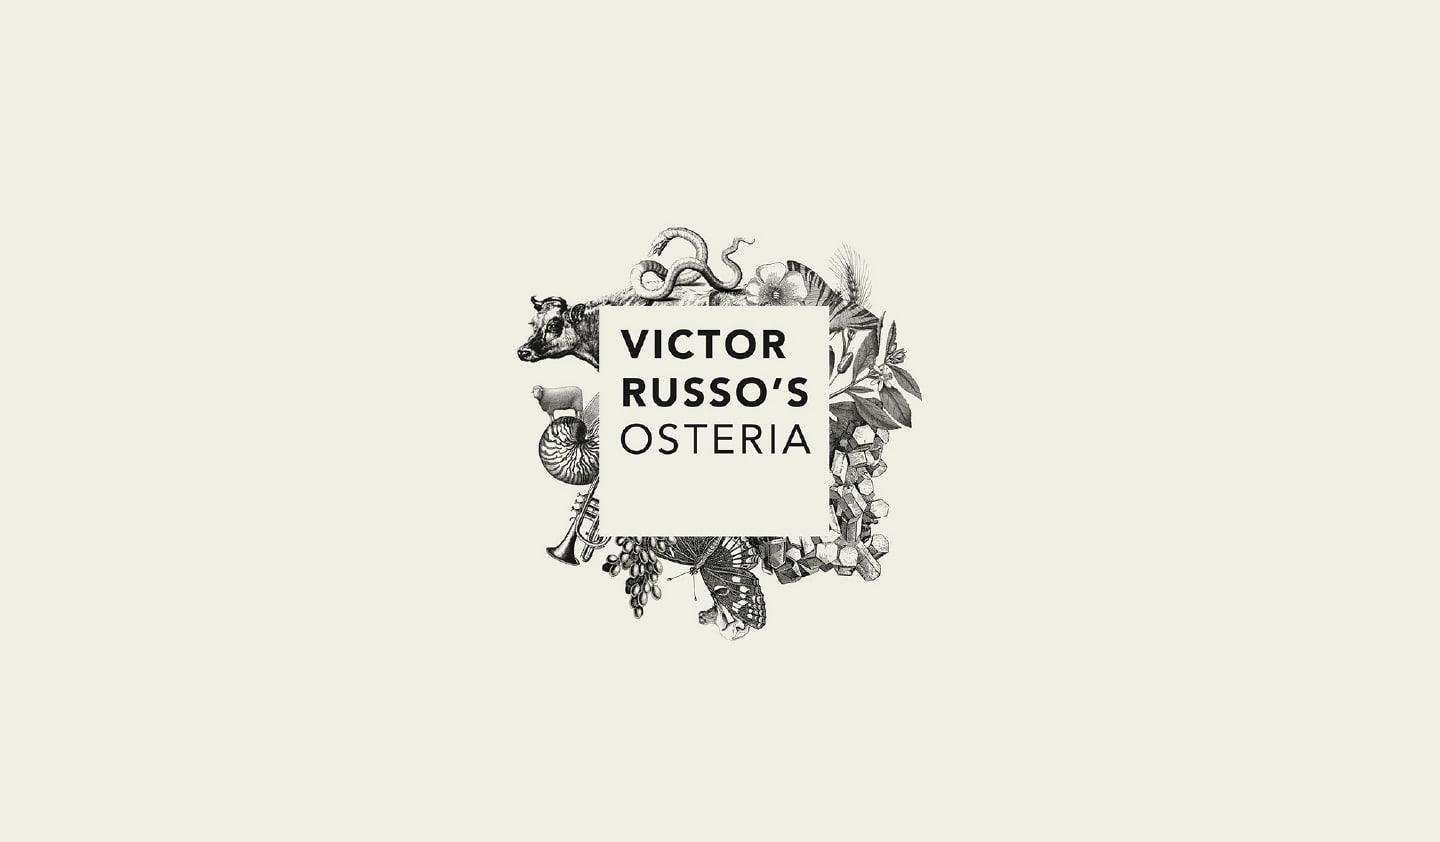 Russo Logo - Total Design case: logo and brand identity for Victor Russo